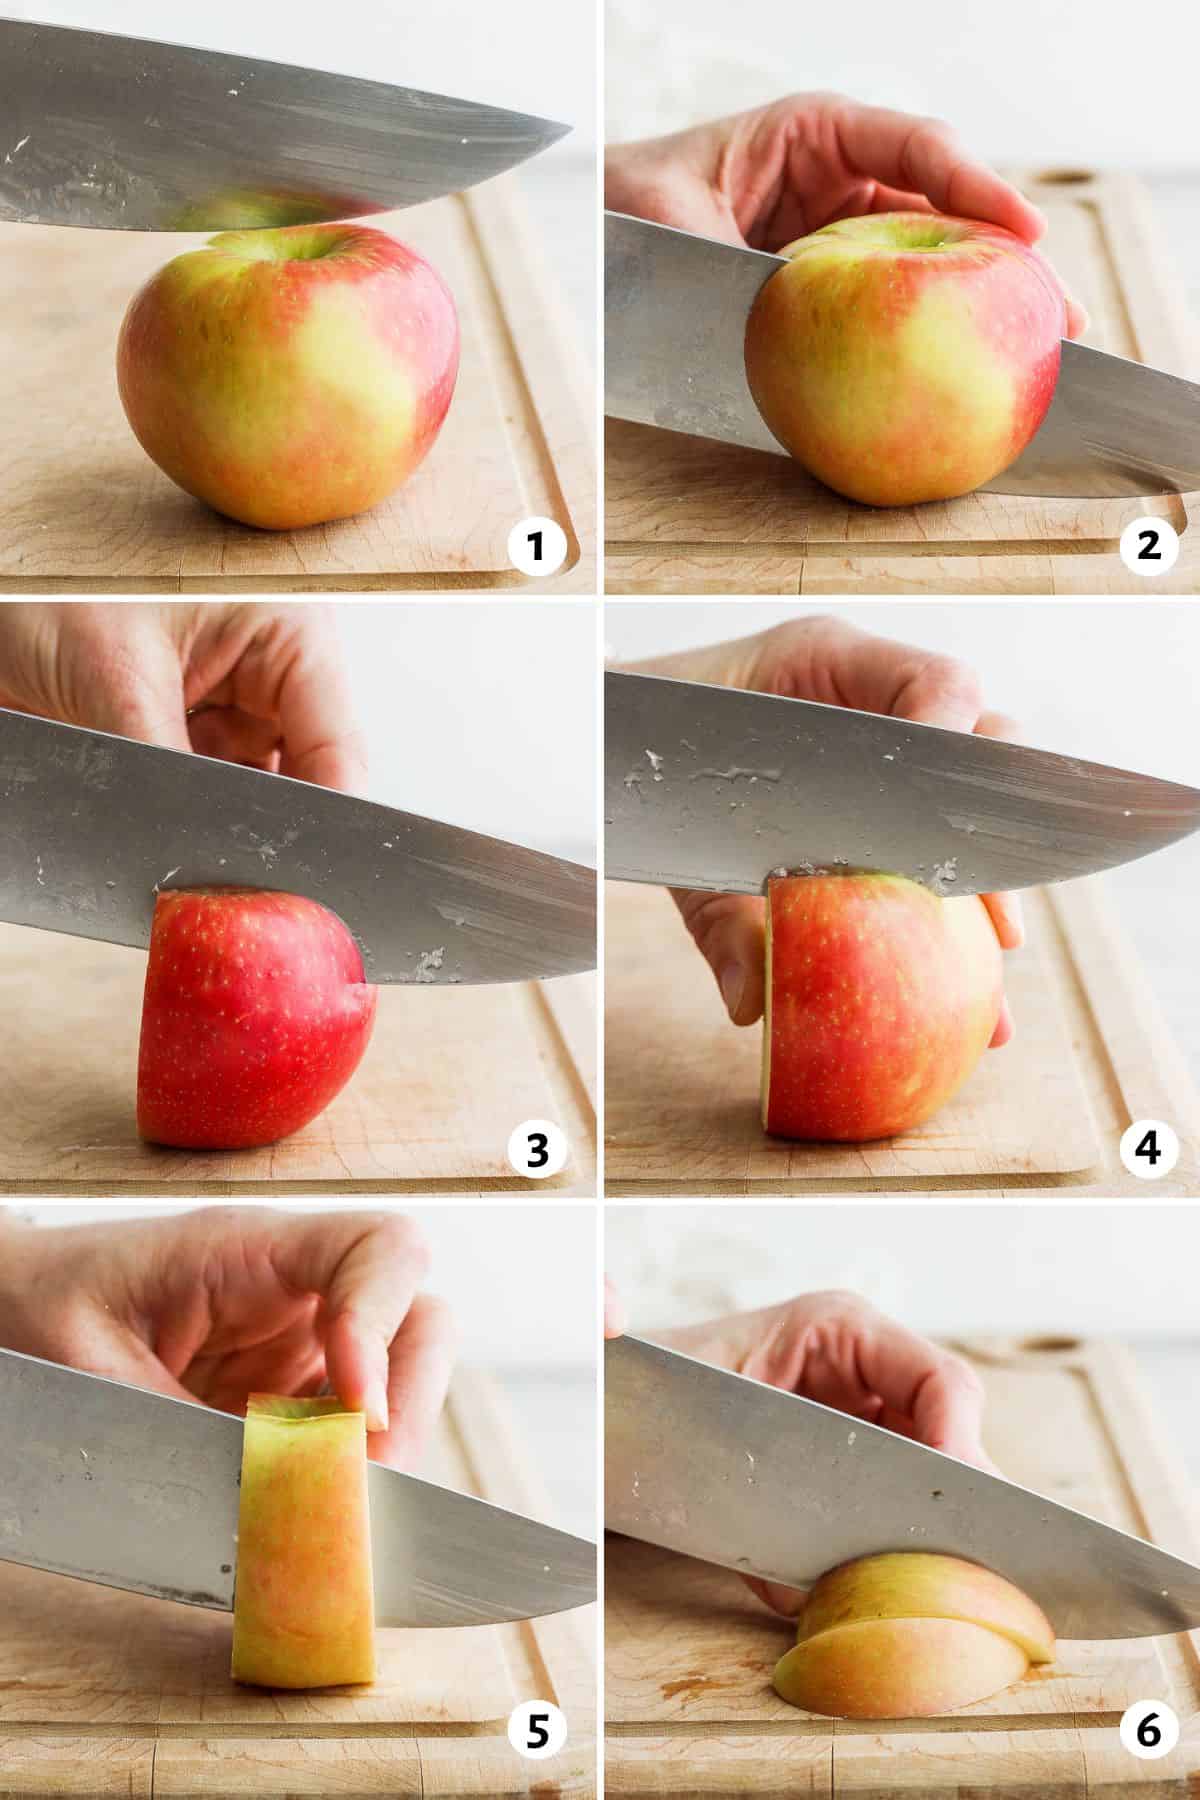 6 image collage showing how to cut an apple by cutting around the core and then slicing.